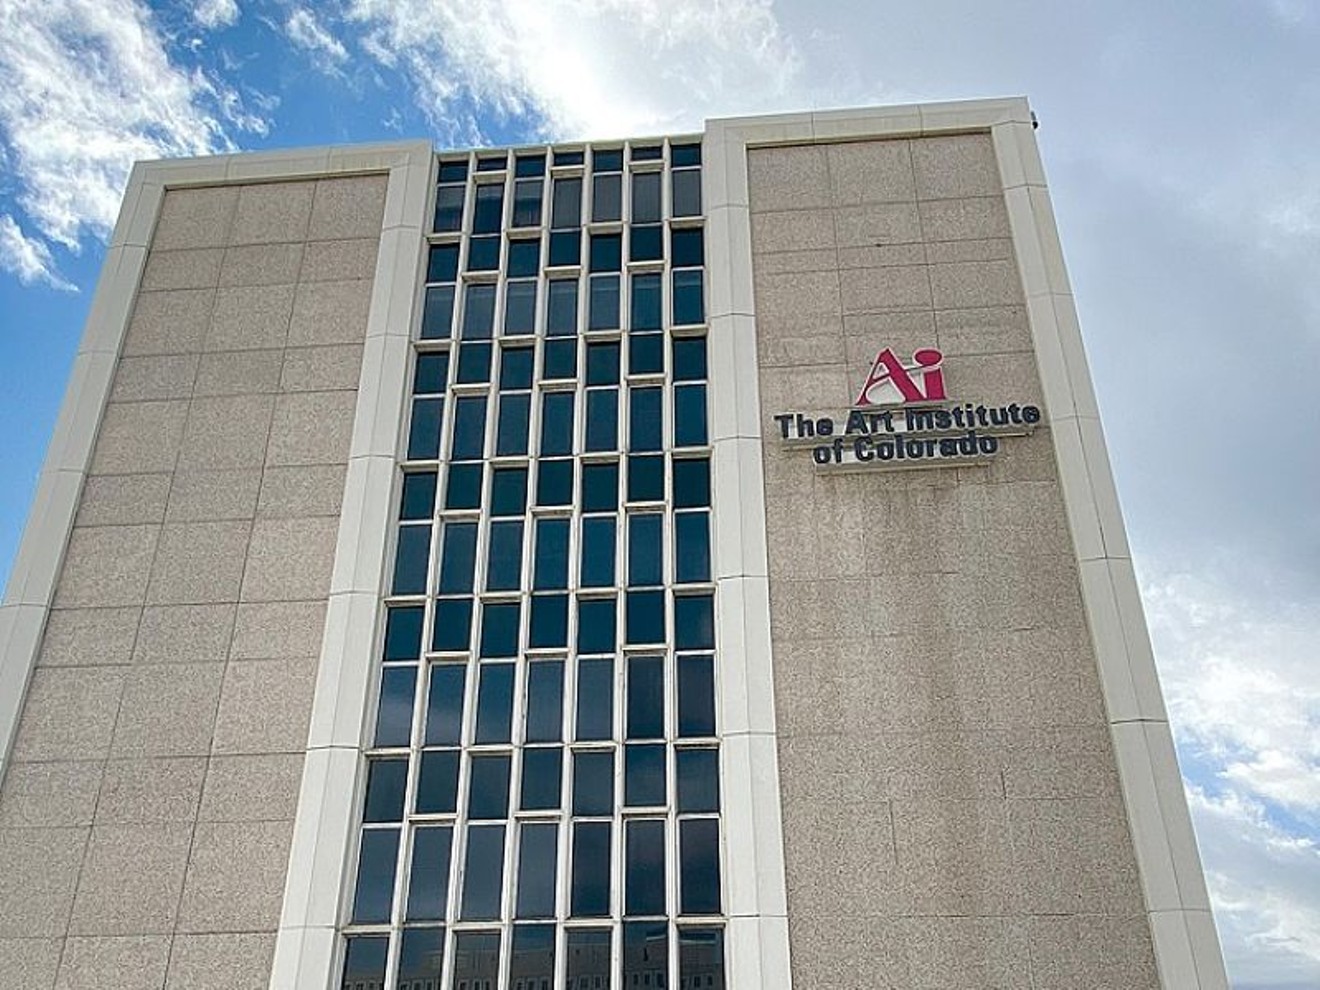 During its last year, the Art Institute of Colorado wasn't accredited.